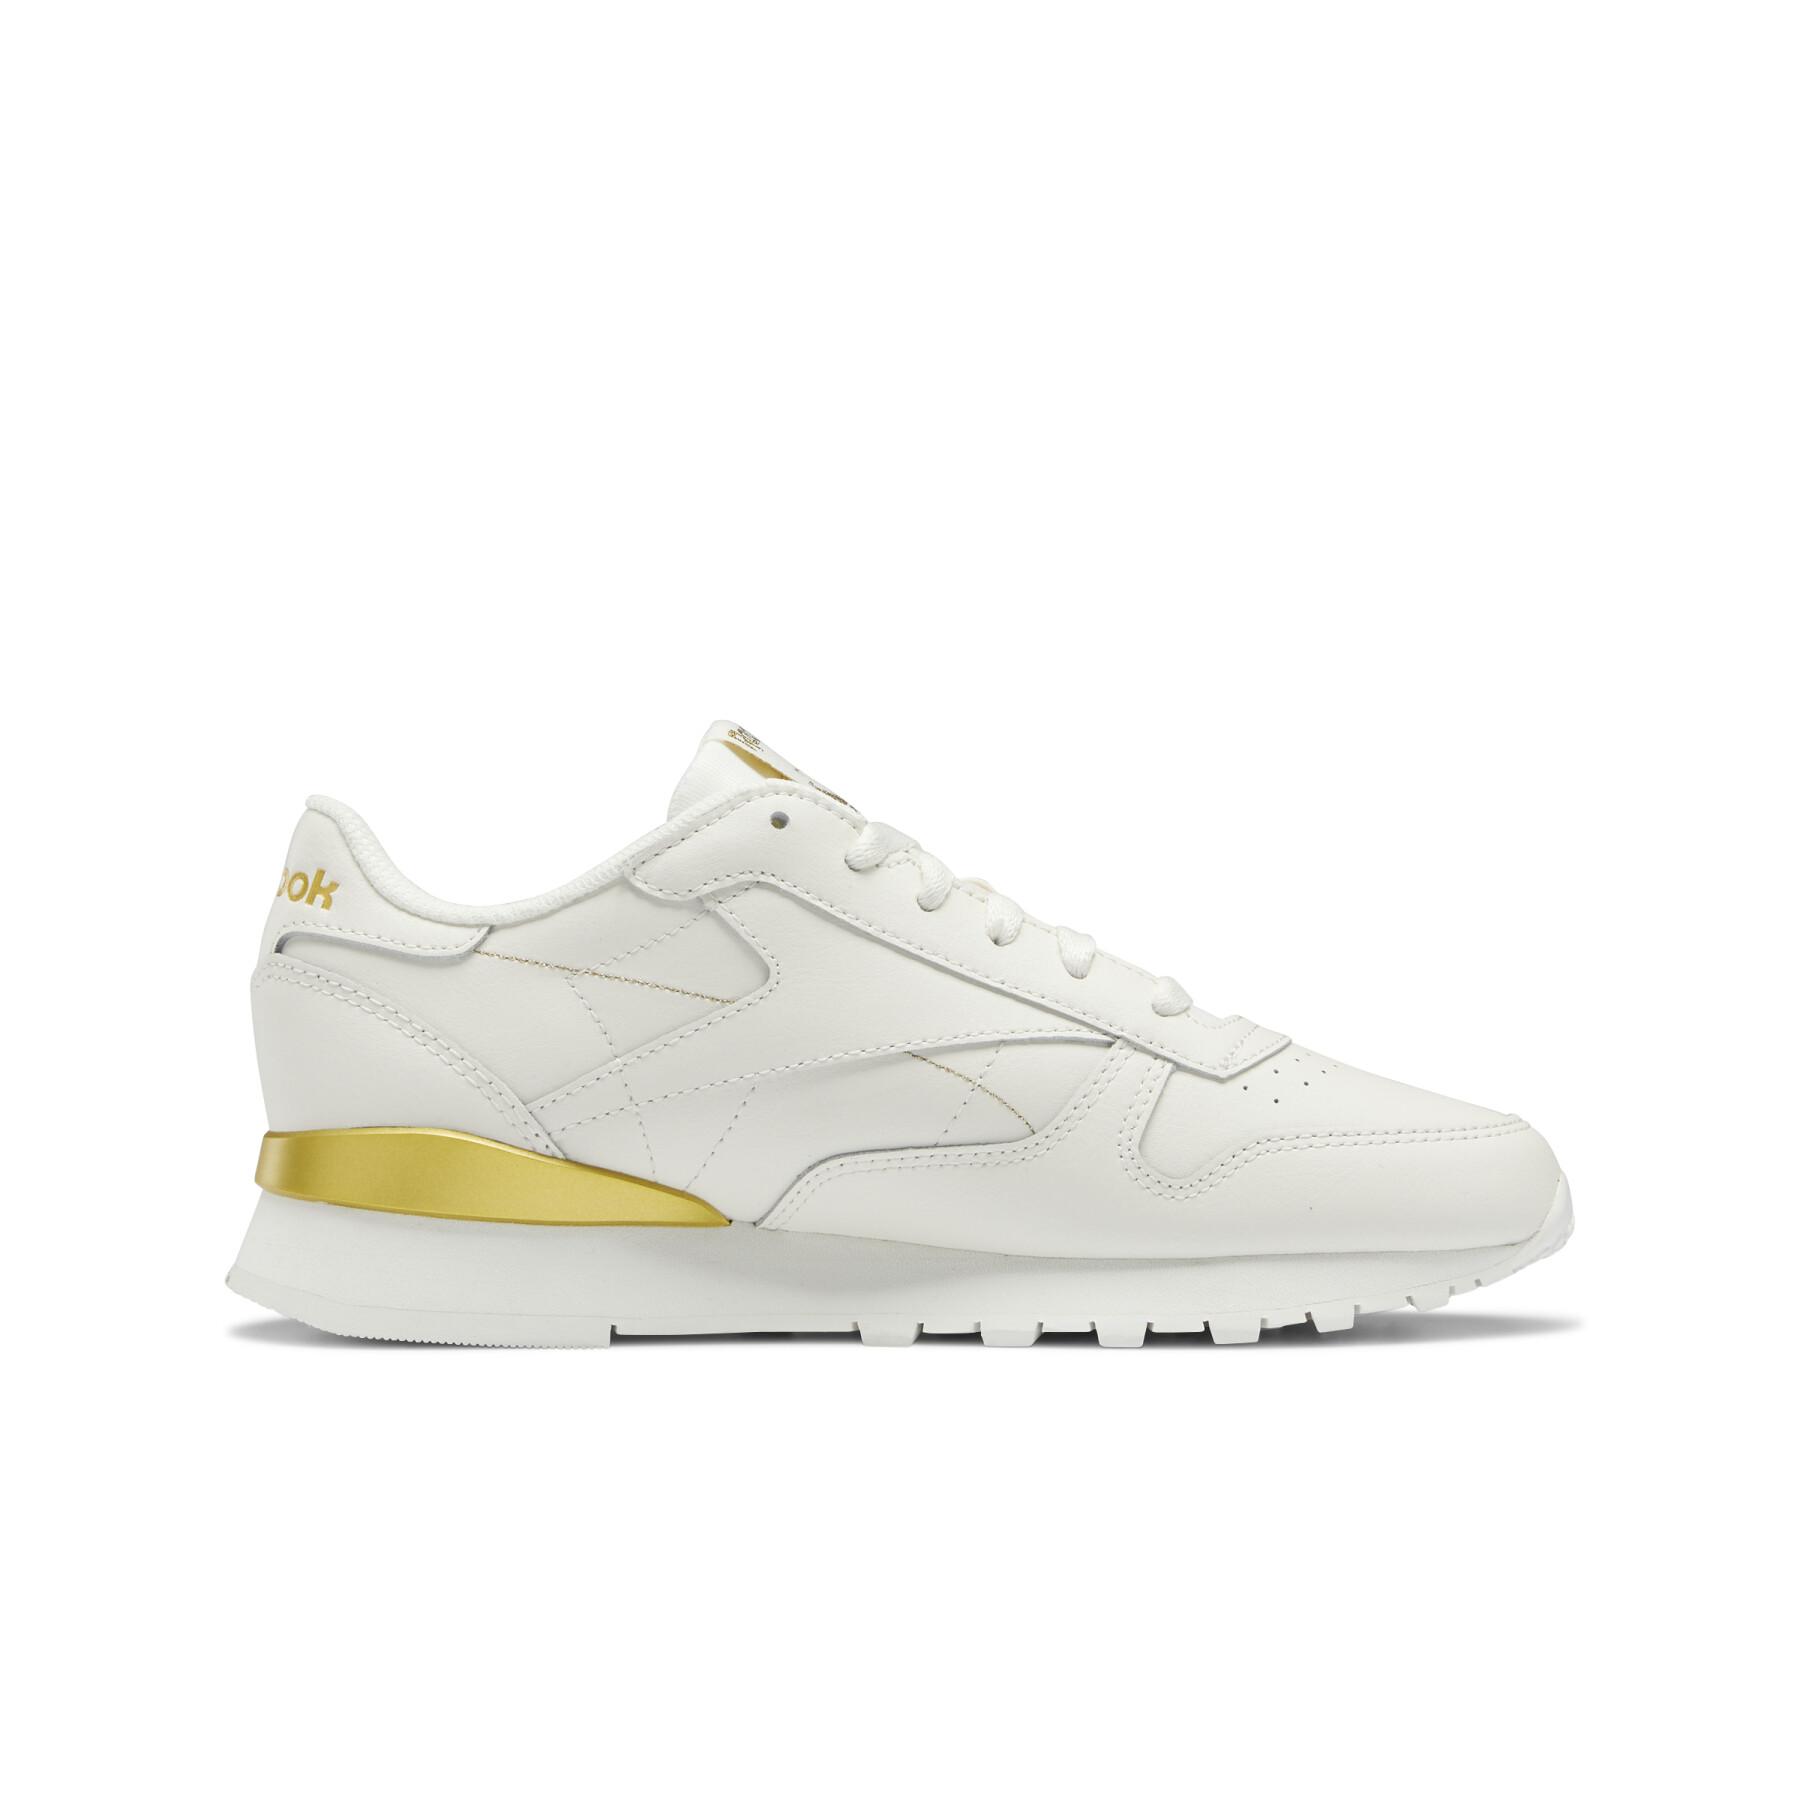 Leather sneakers for women Reebok Classic